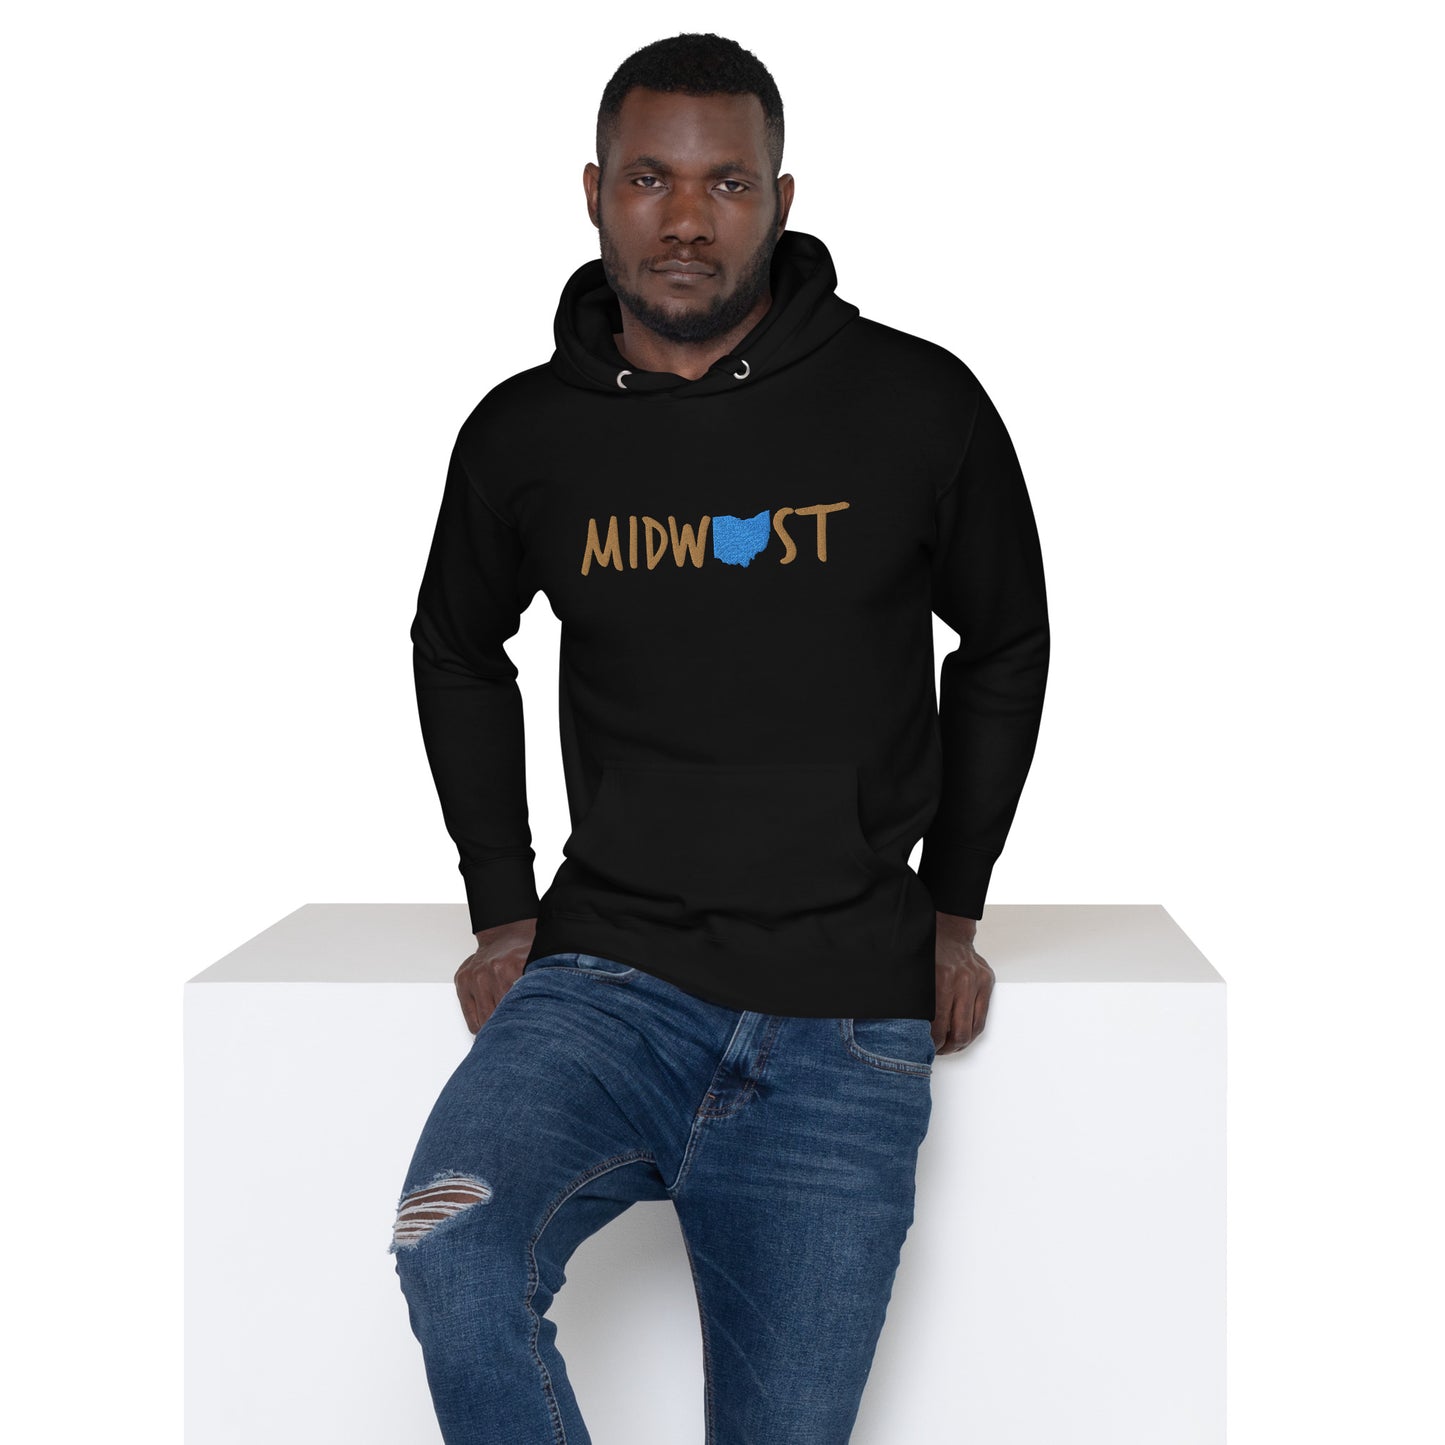 Ohio Midwest 'Love This' Embroidered Unisex Hoodie